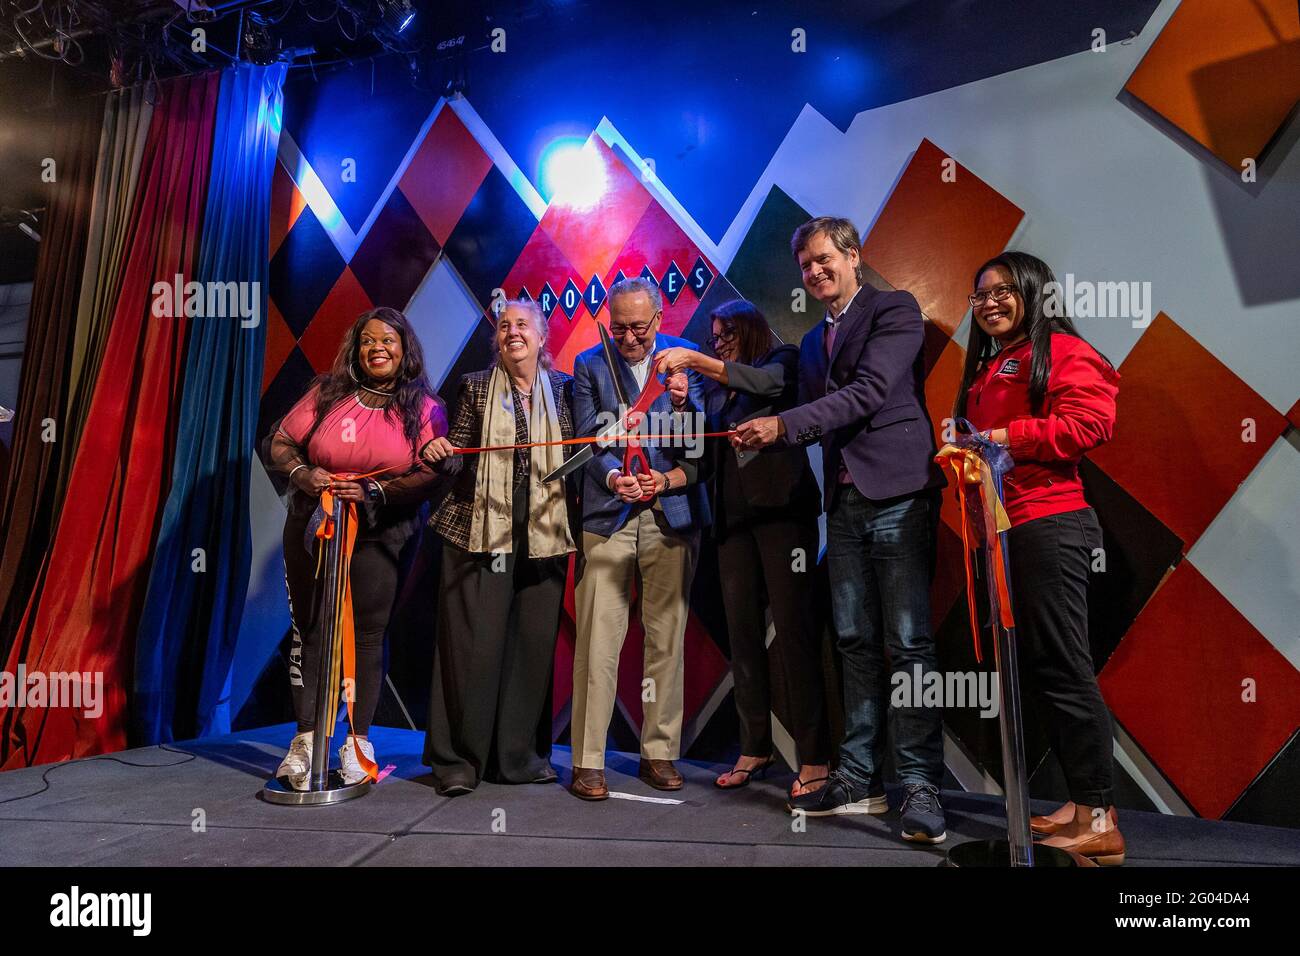 New York, United States. 31st May, 2021. Comedian Yamaneika Saunders, Manhattan Borough President Gale Brewer, U. S. Senator Charles Schumer, Caroline Hirsch, State Senator Brad Hoylman, guest cut ribbon with others at Carolines on Broadway comedy club re-opening after pandemic ceremony. Senator Charles Schumer lauded Safe our Stages (SOS) bill passed by Senate to help cultural venues to survive pandemic. He also cracked few jokes saying it is comedy club he does not have a choice but say them. (Photo by Lev Radin/Pacific Press) Credit: Pacific Press Media Production Corp./Alamy Live News Stock Photo